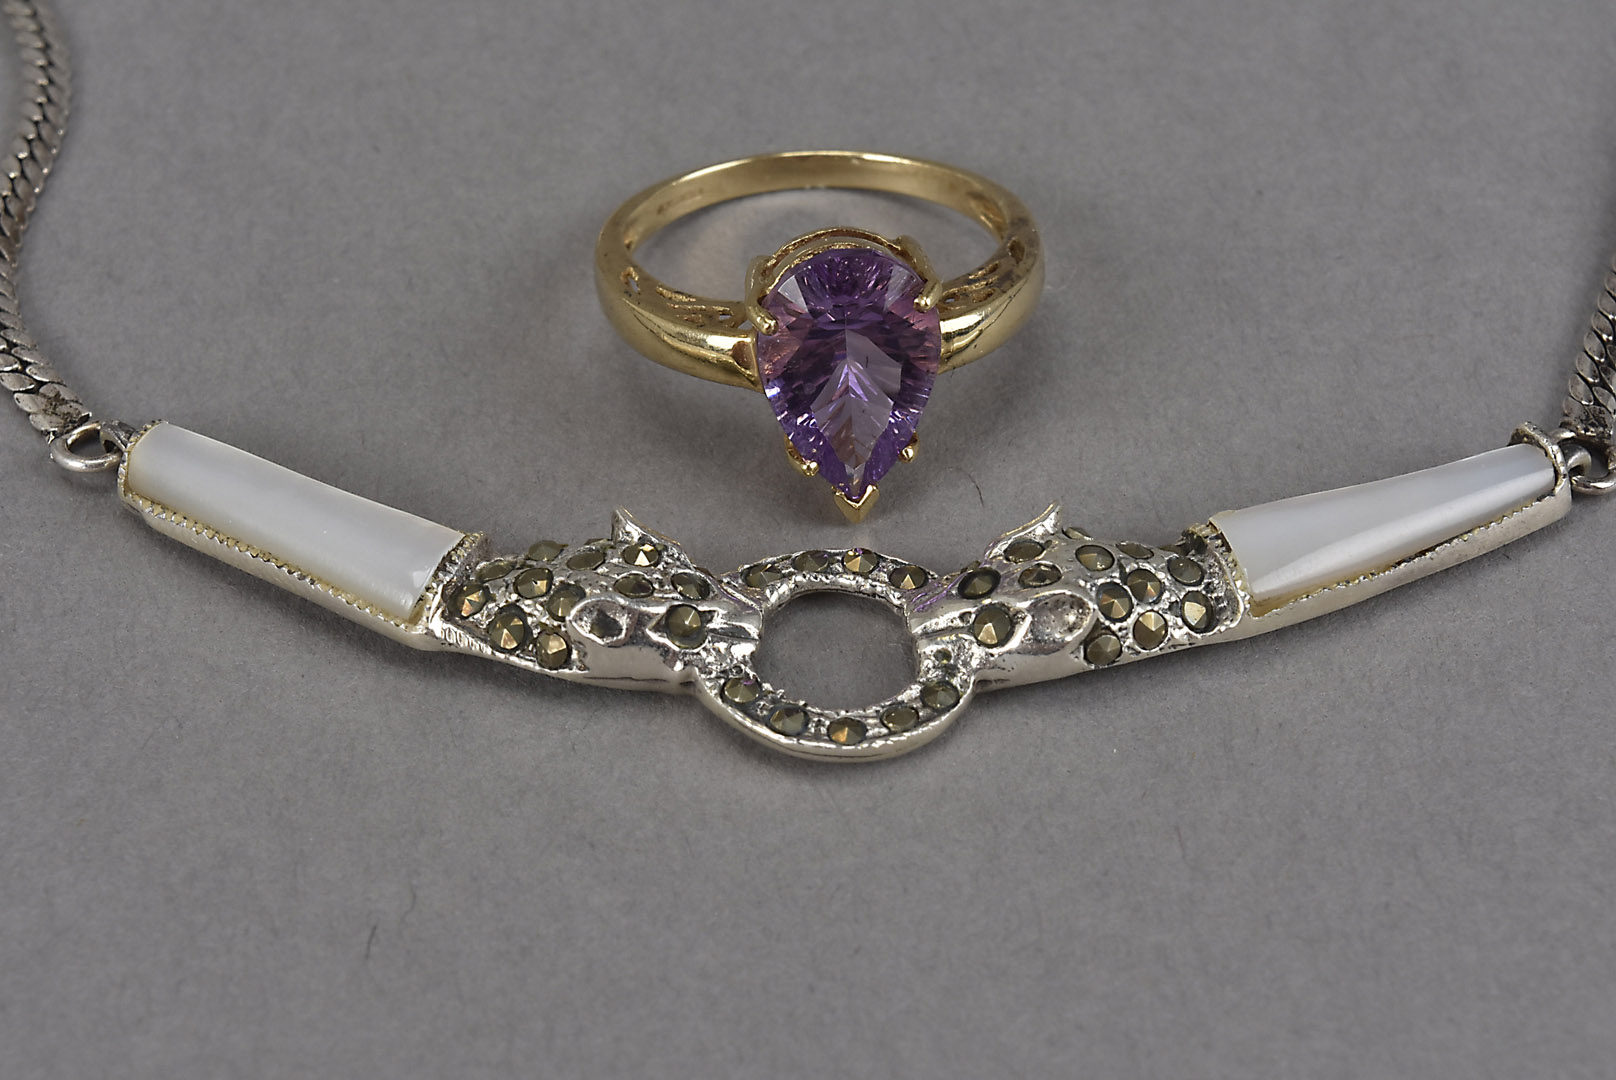 A modern 9ct gold and amethyst solitaire dress ring, together with a silver necklace with